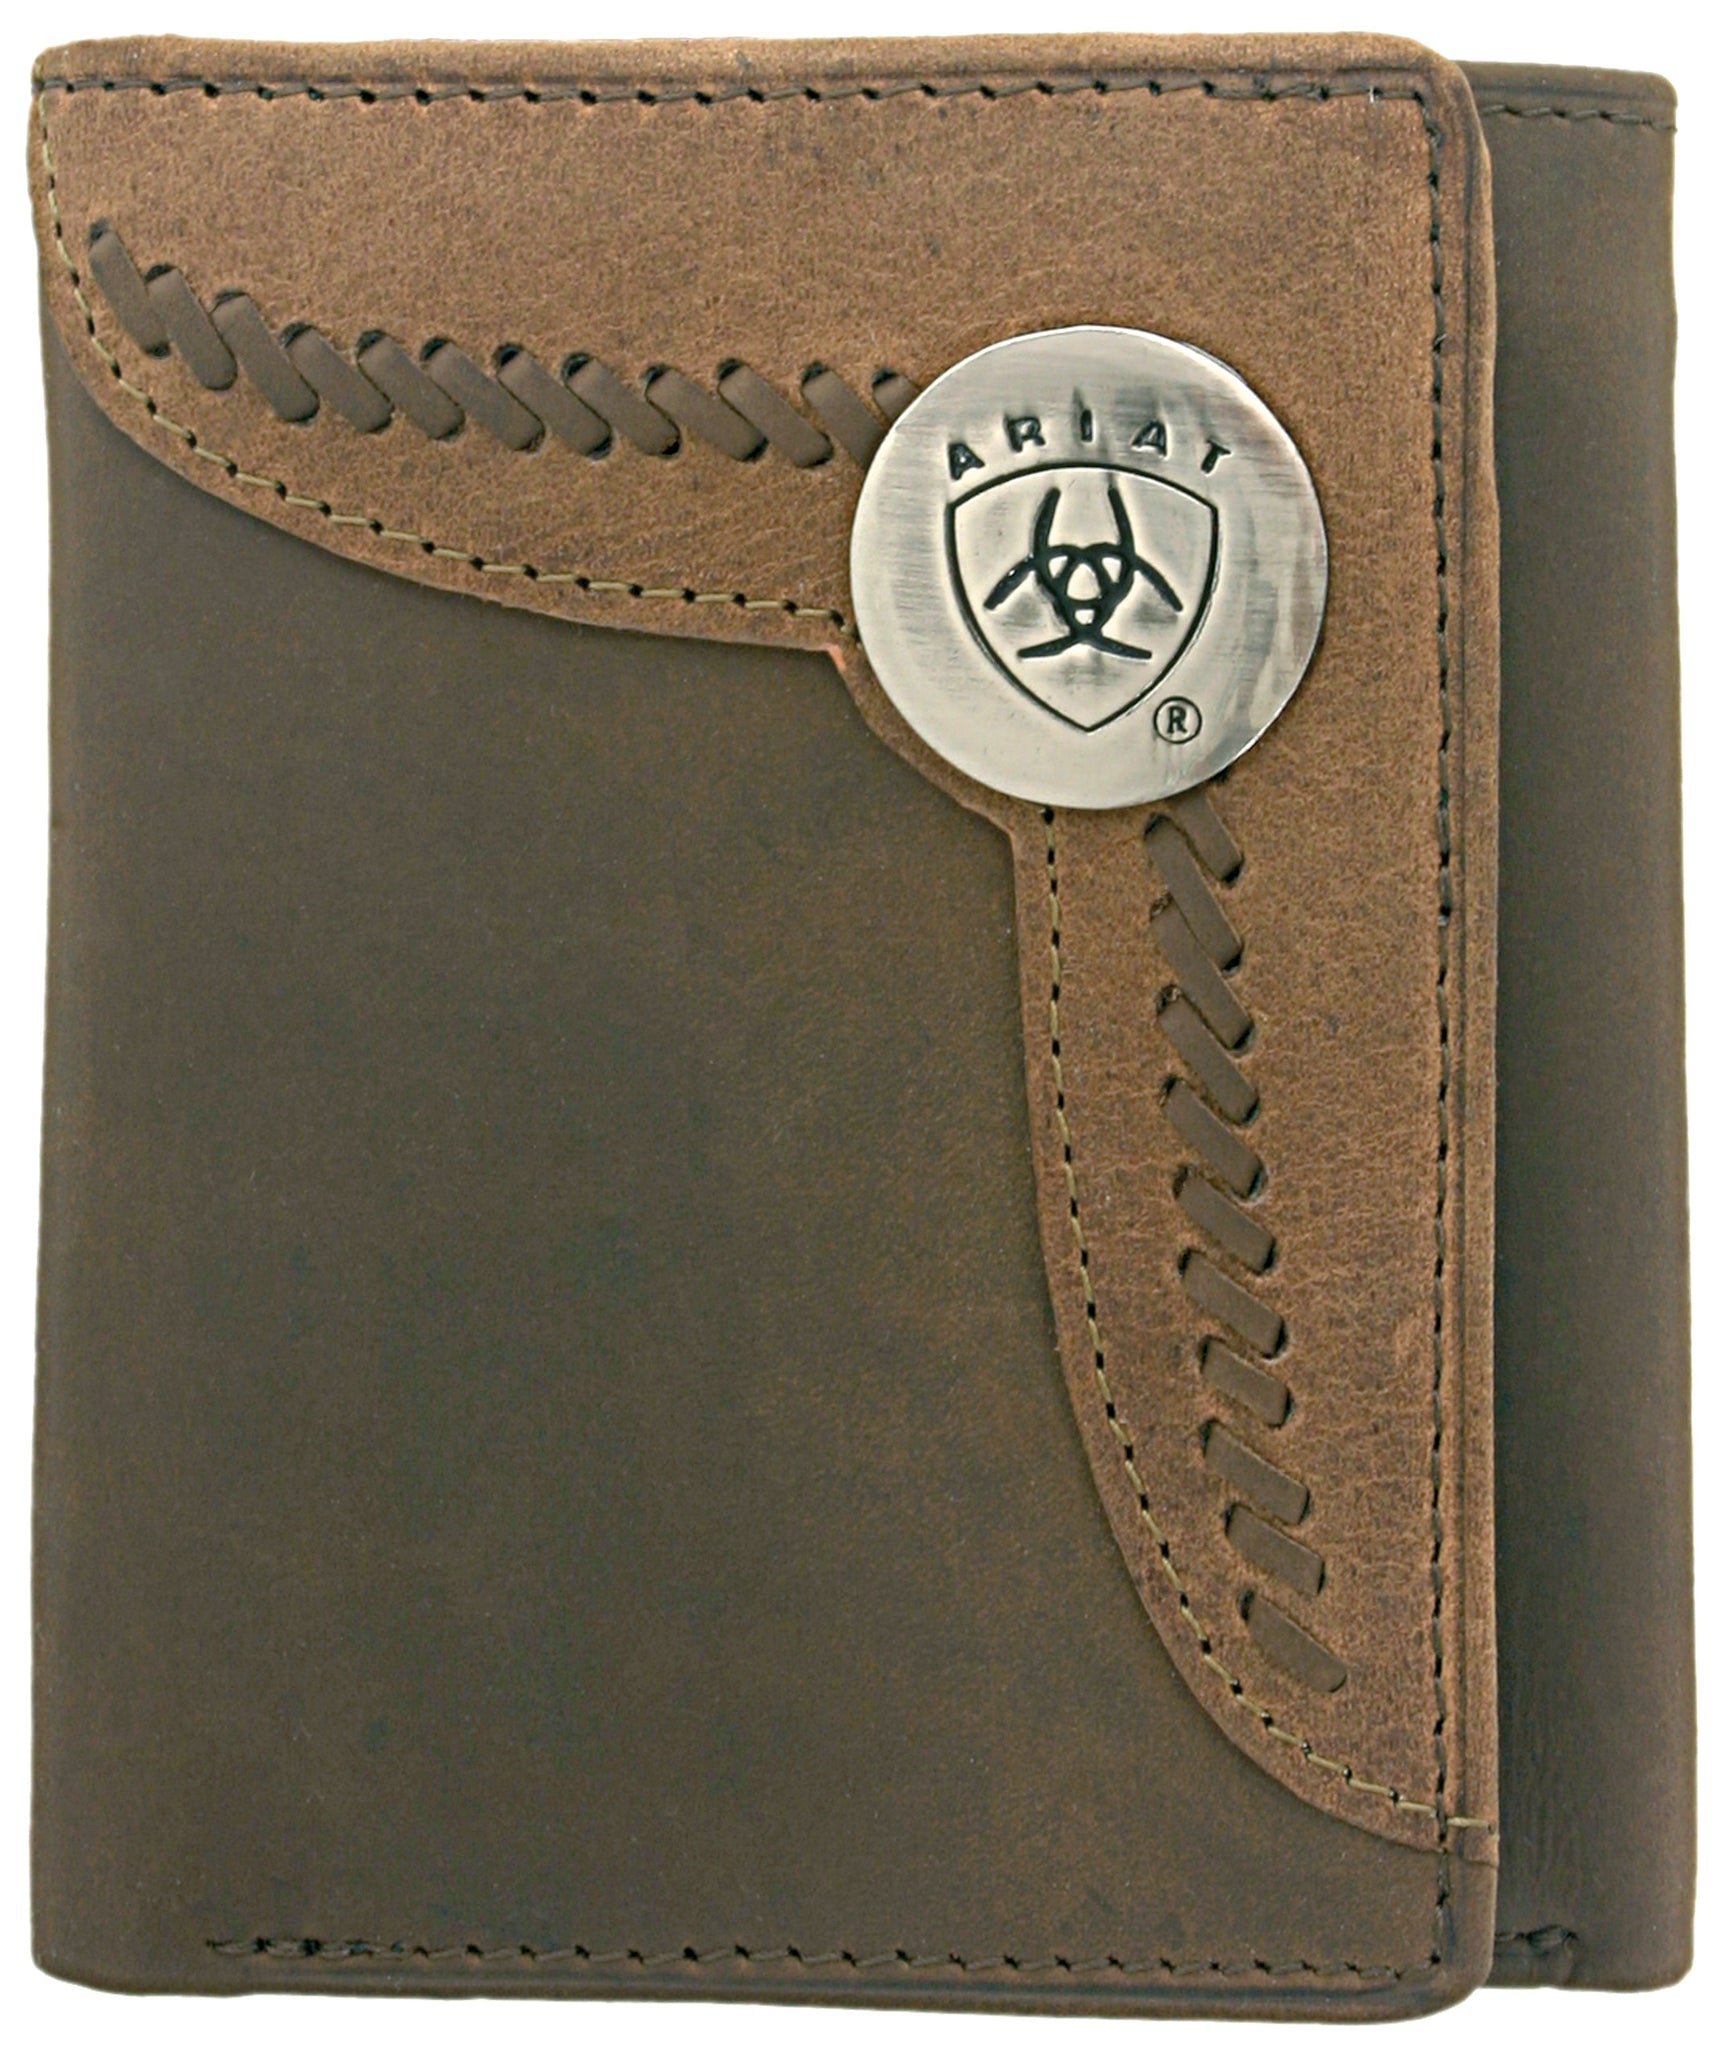 Ariat Tri-Fold Wallet - Two Toned Accent Overlay